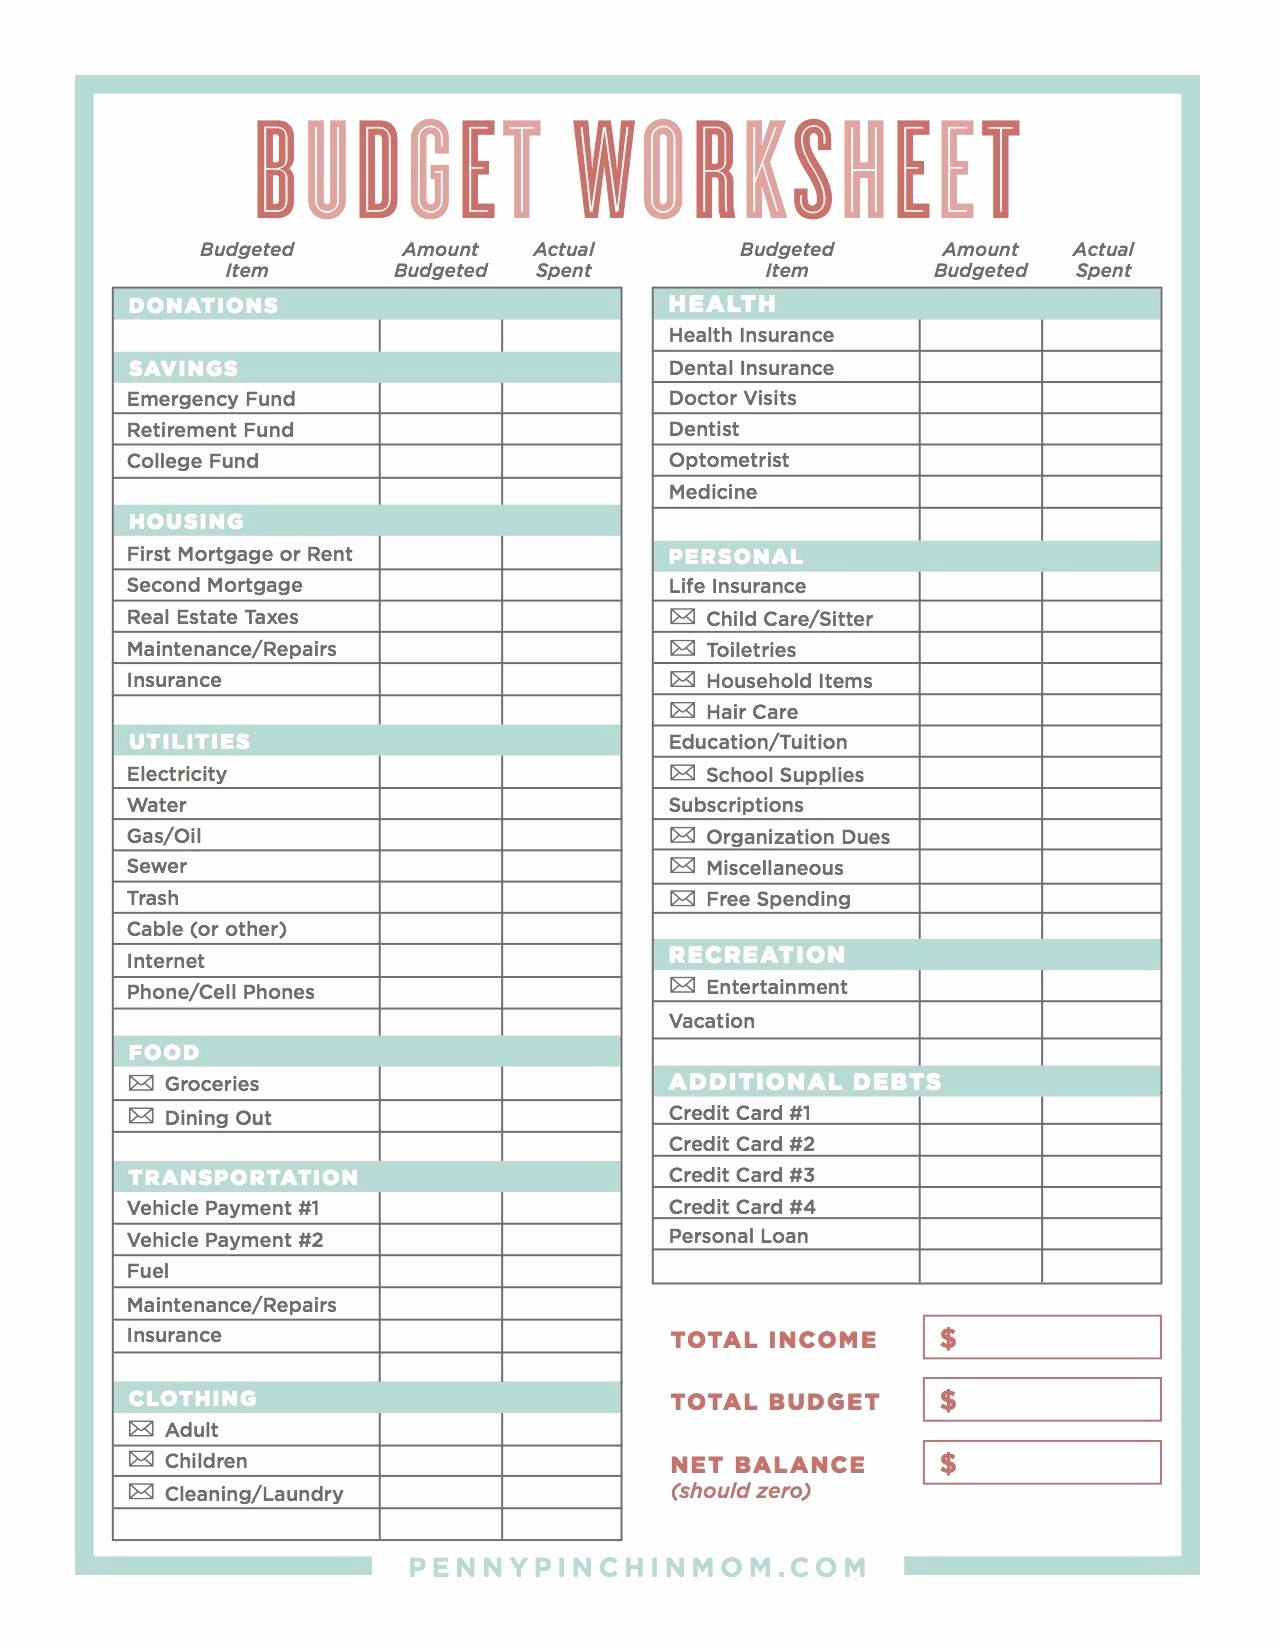 Monthly Retirement Planning Worksheet Answers Dave Ramsey